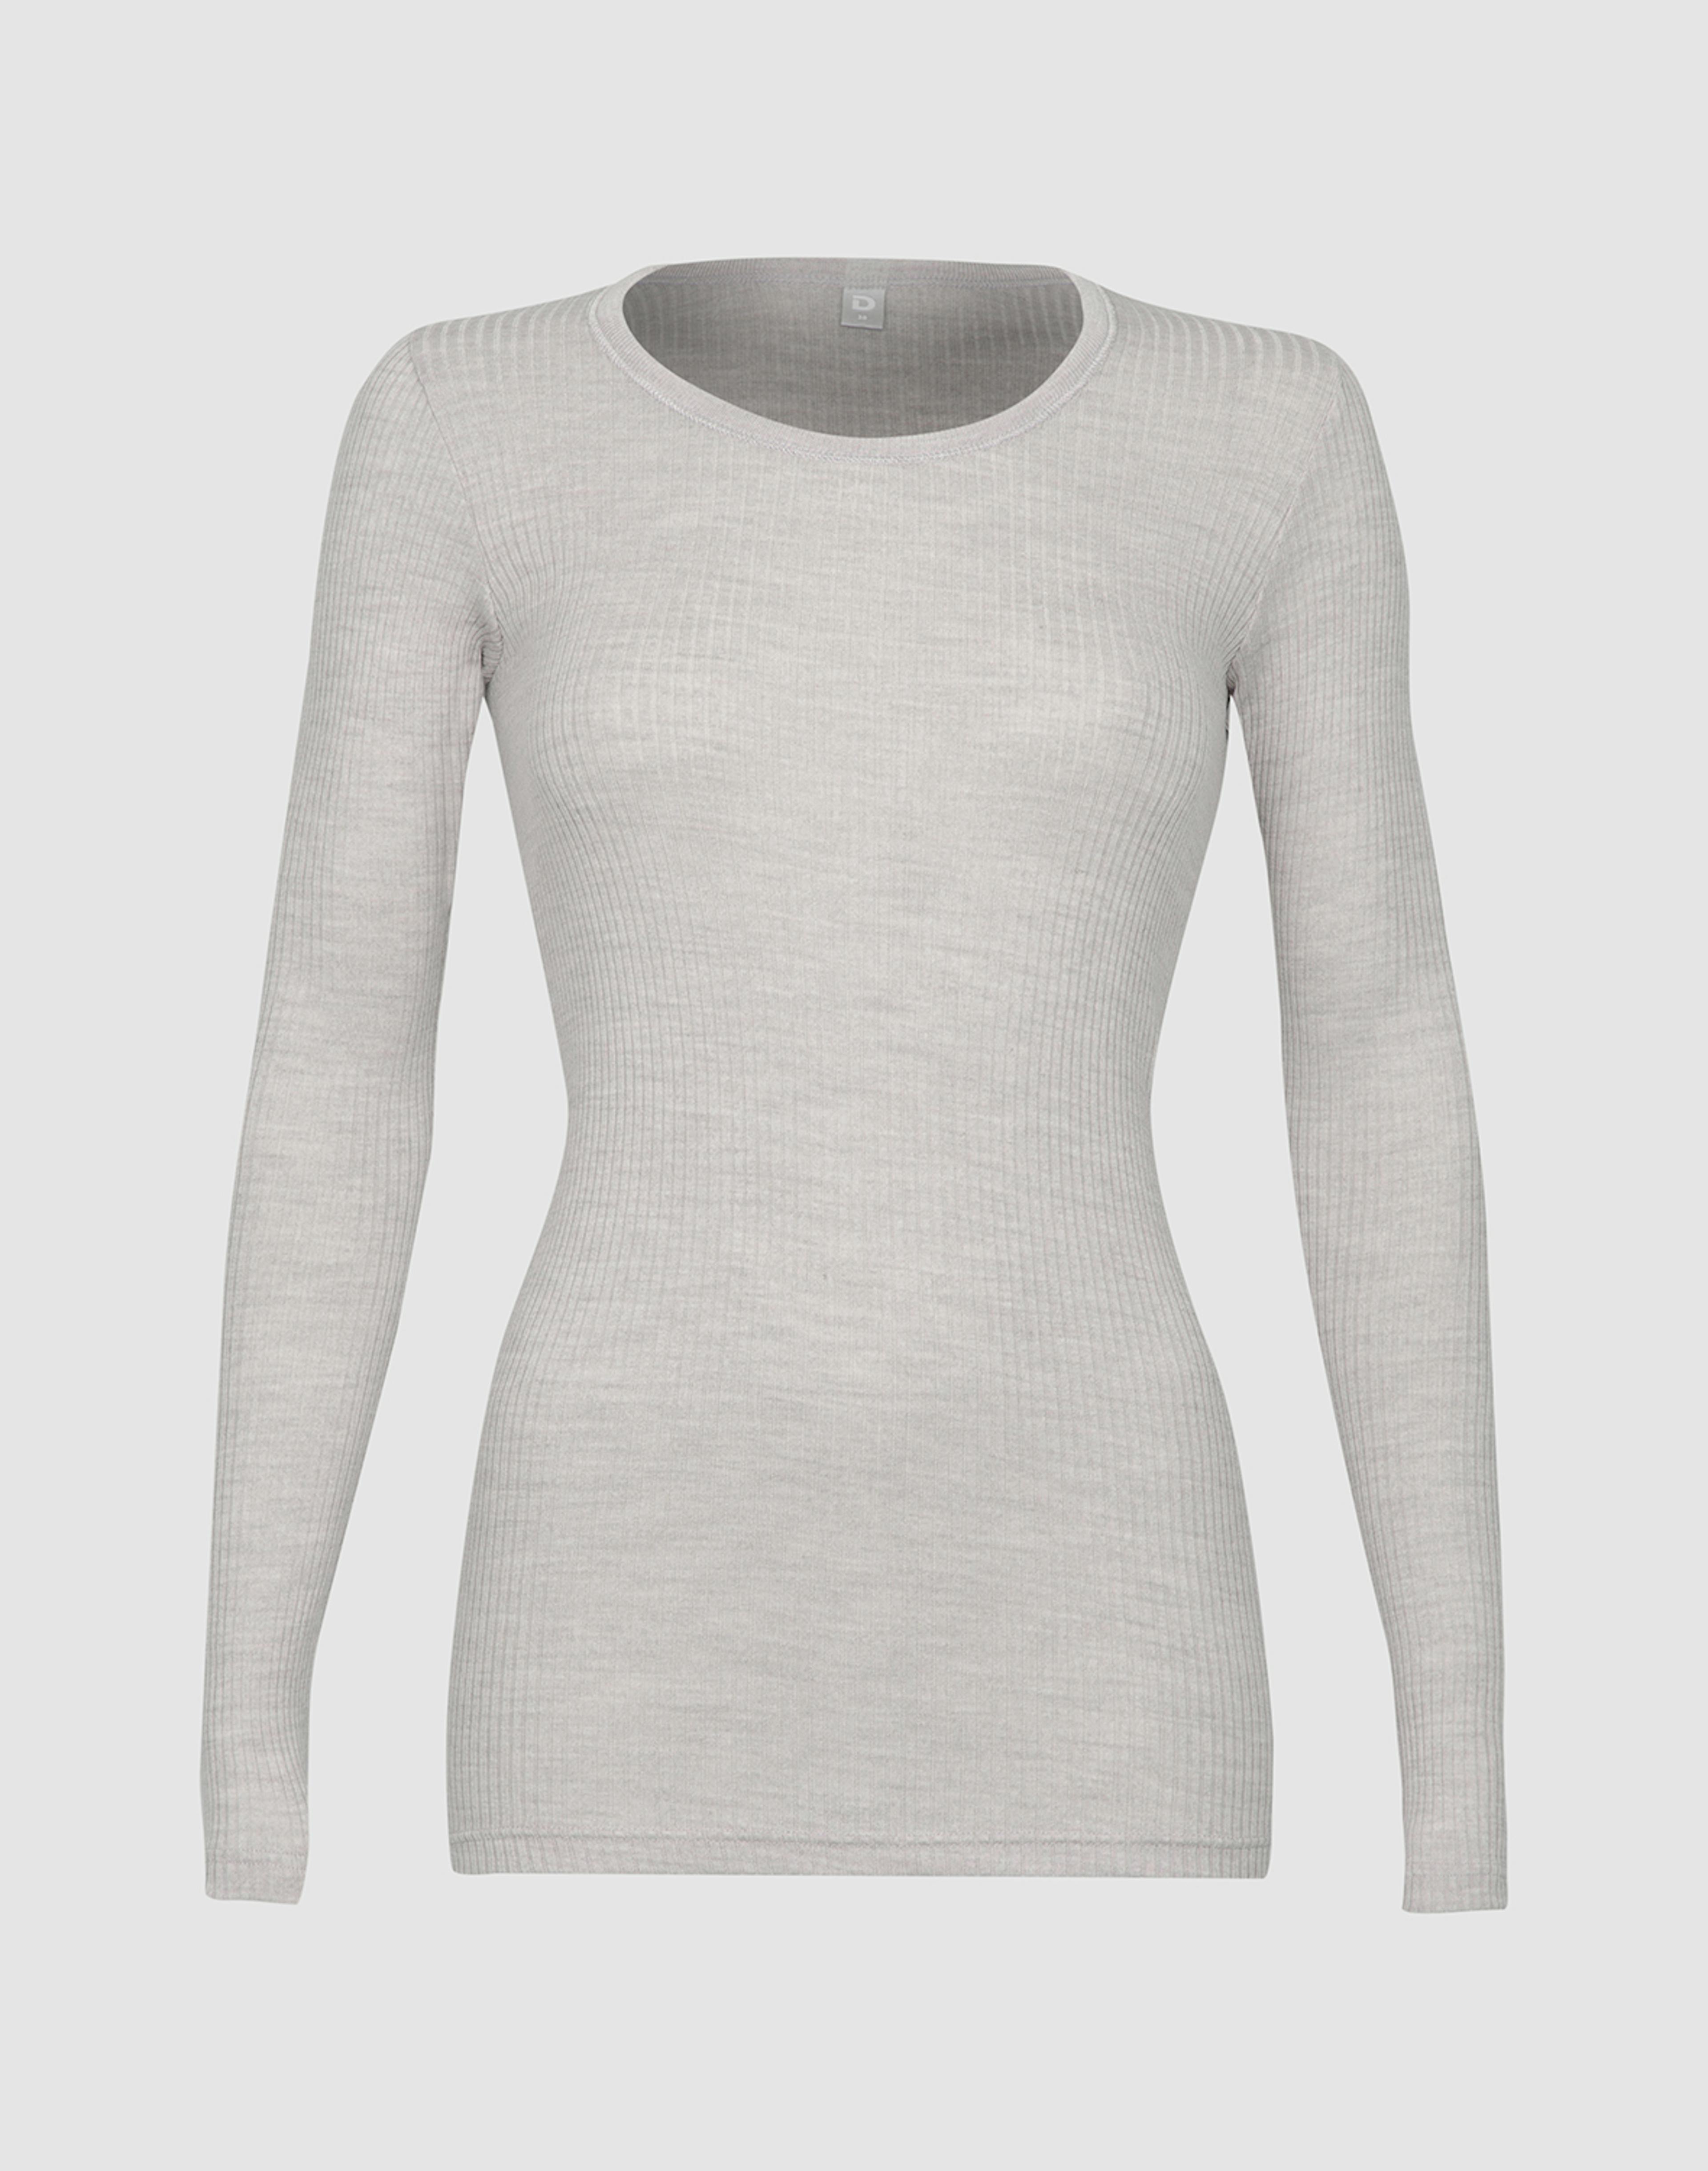 Buy Grey/White Long Sleeve Thermal Tops 2 Pack (2-16yrs) from the Next UK  online shop